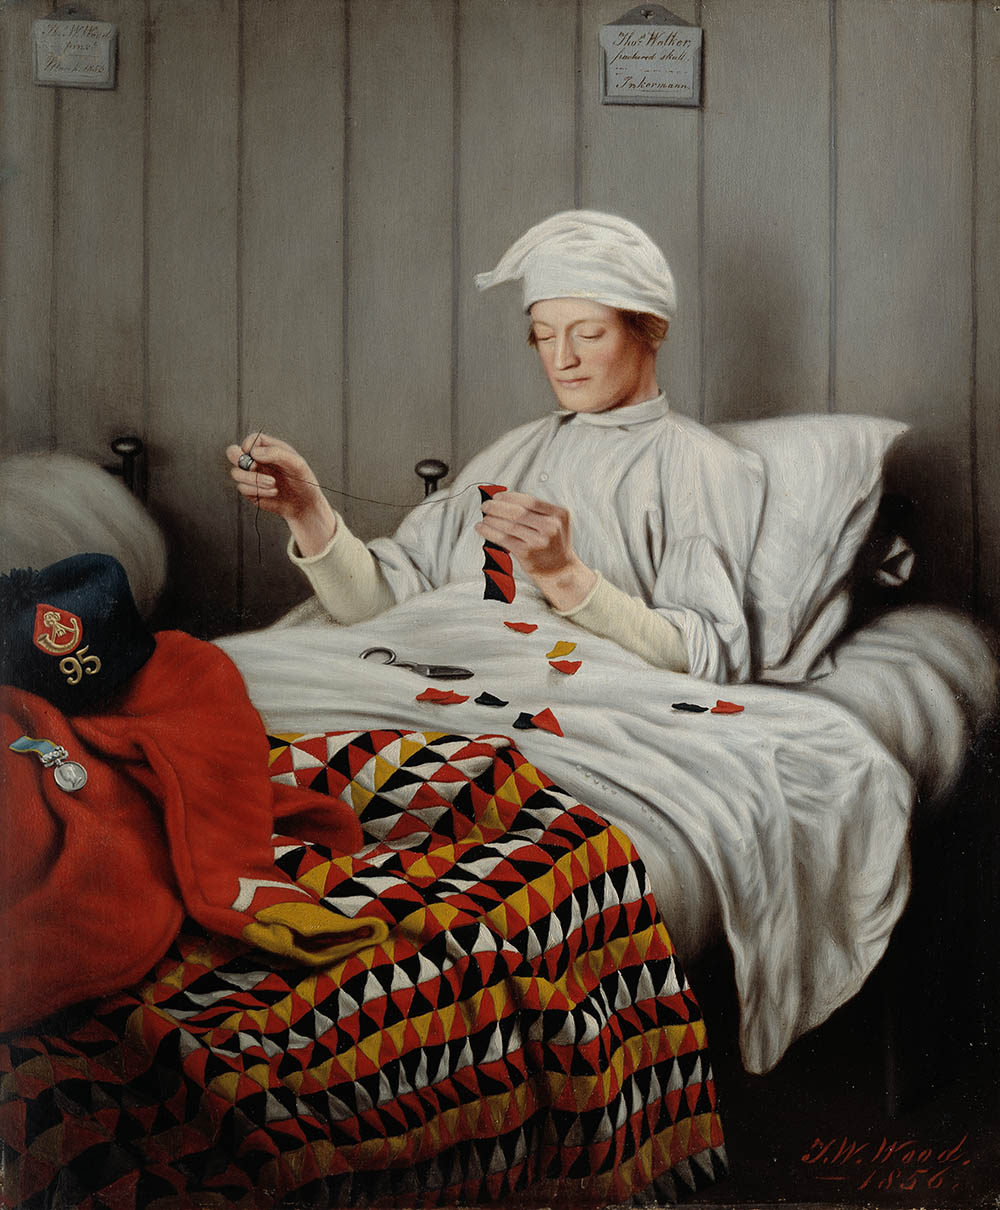 A realistic picture of a soldier in old fashioned pajamas with cap in a bed sewing together a quilt.